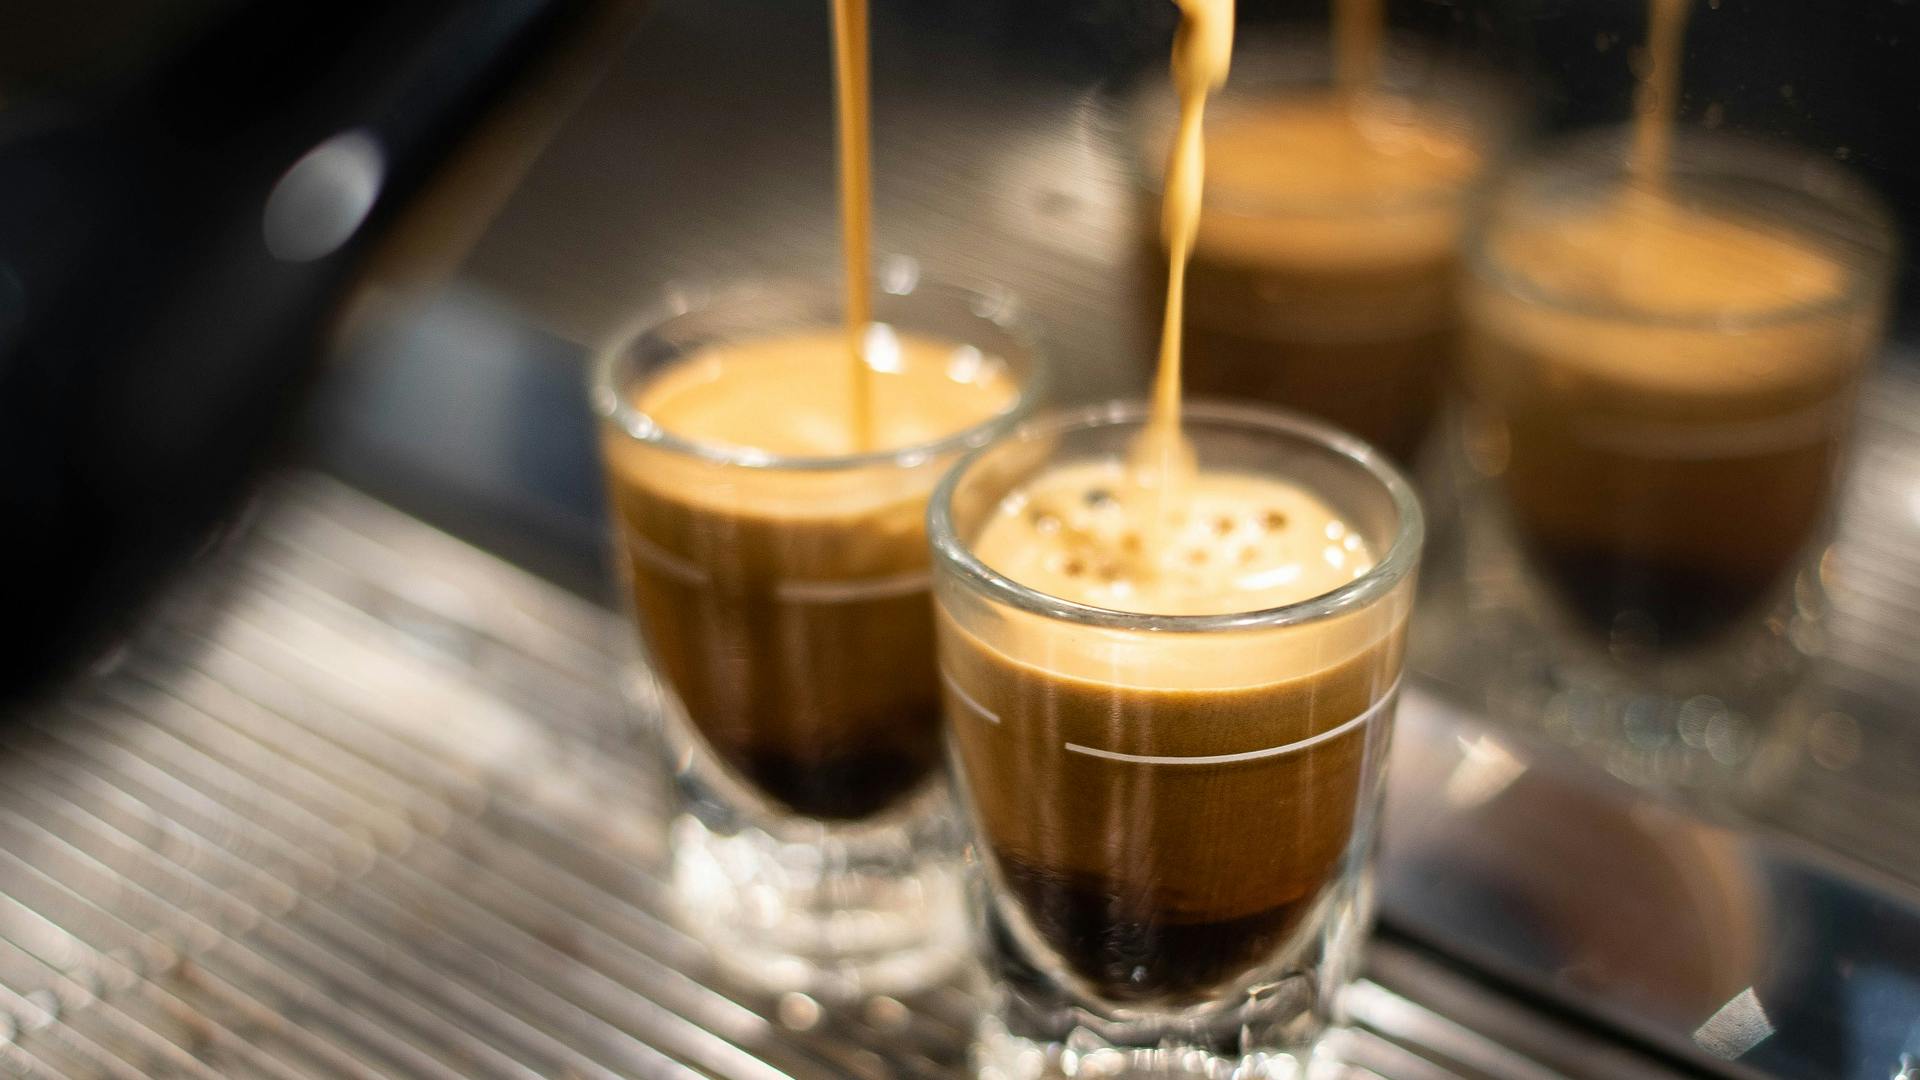 Espresso shots being pulled.